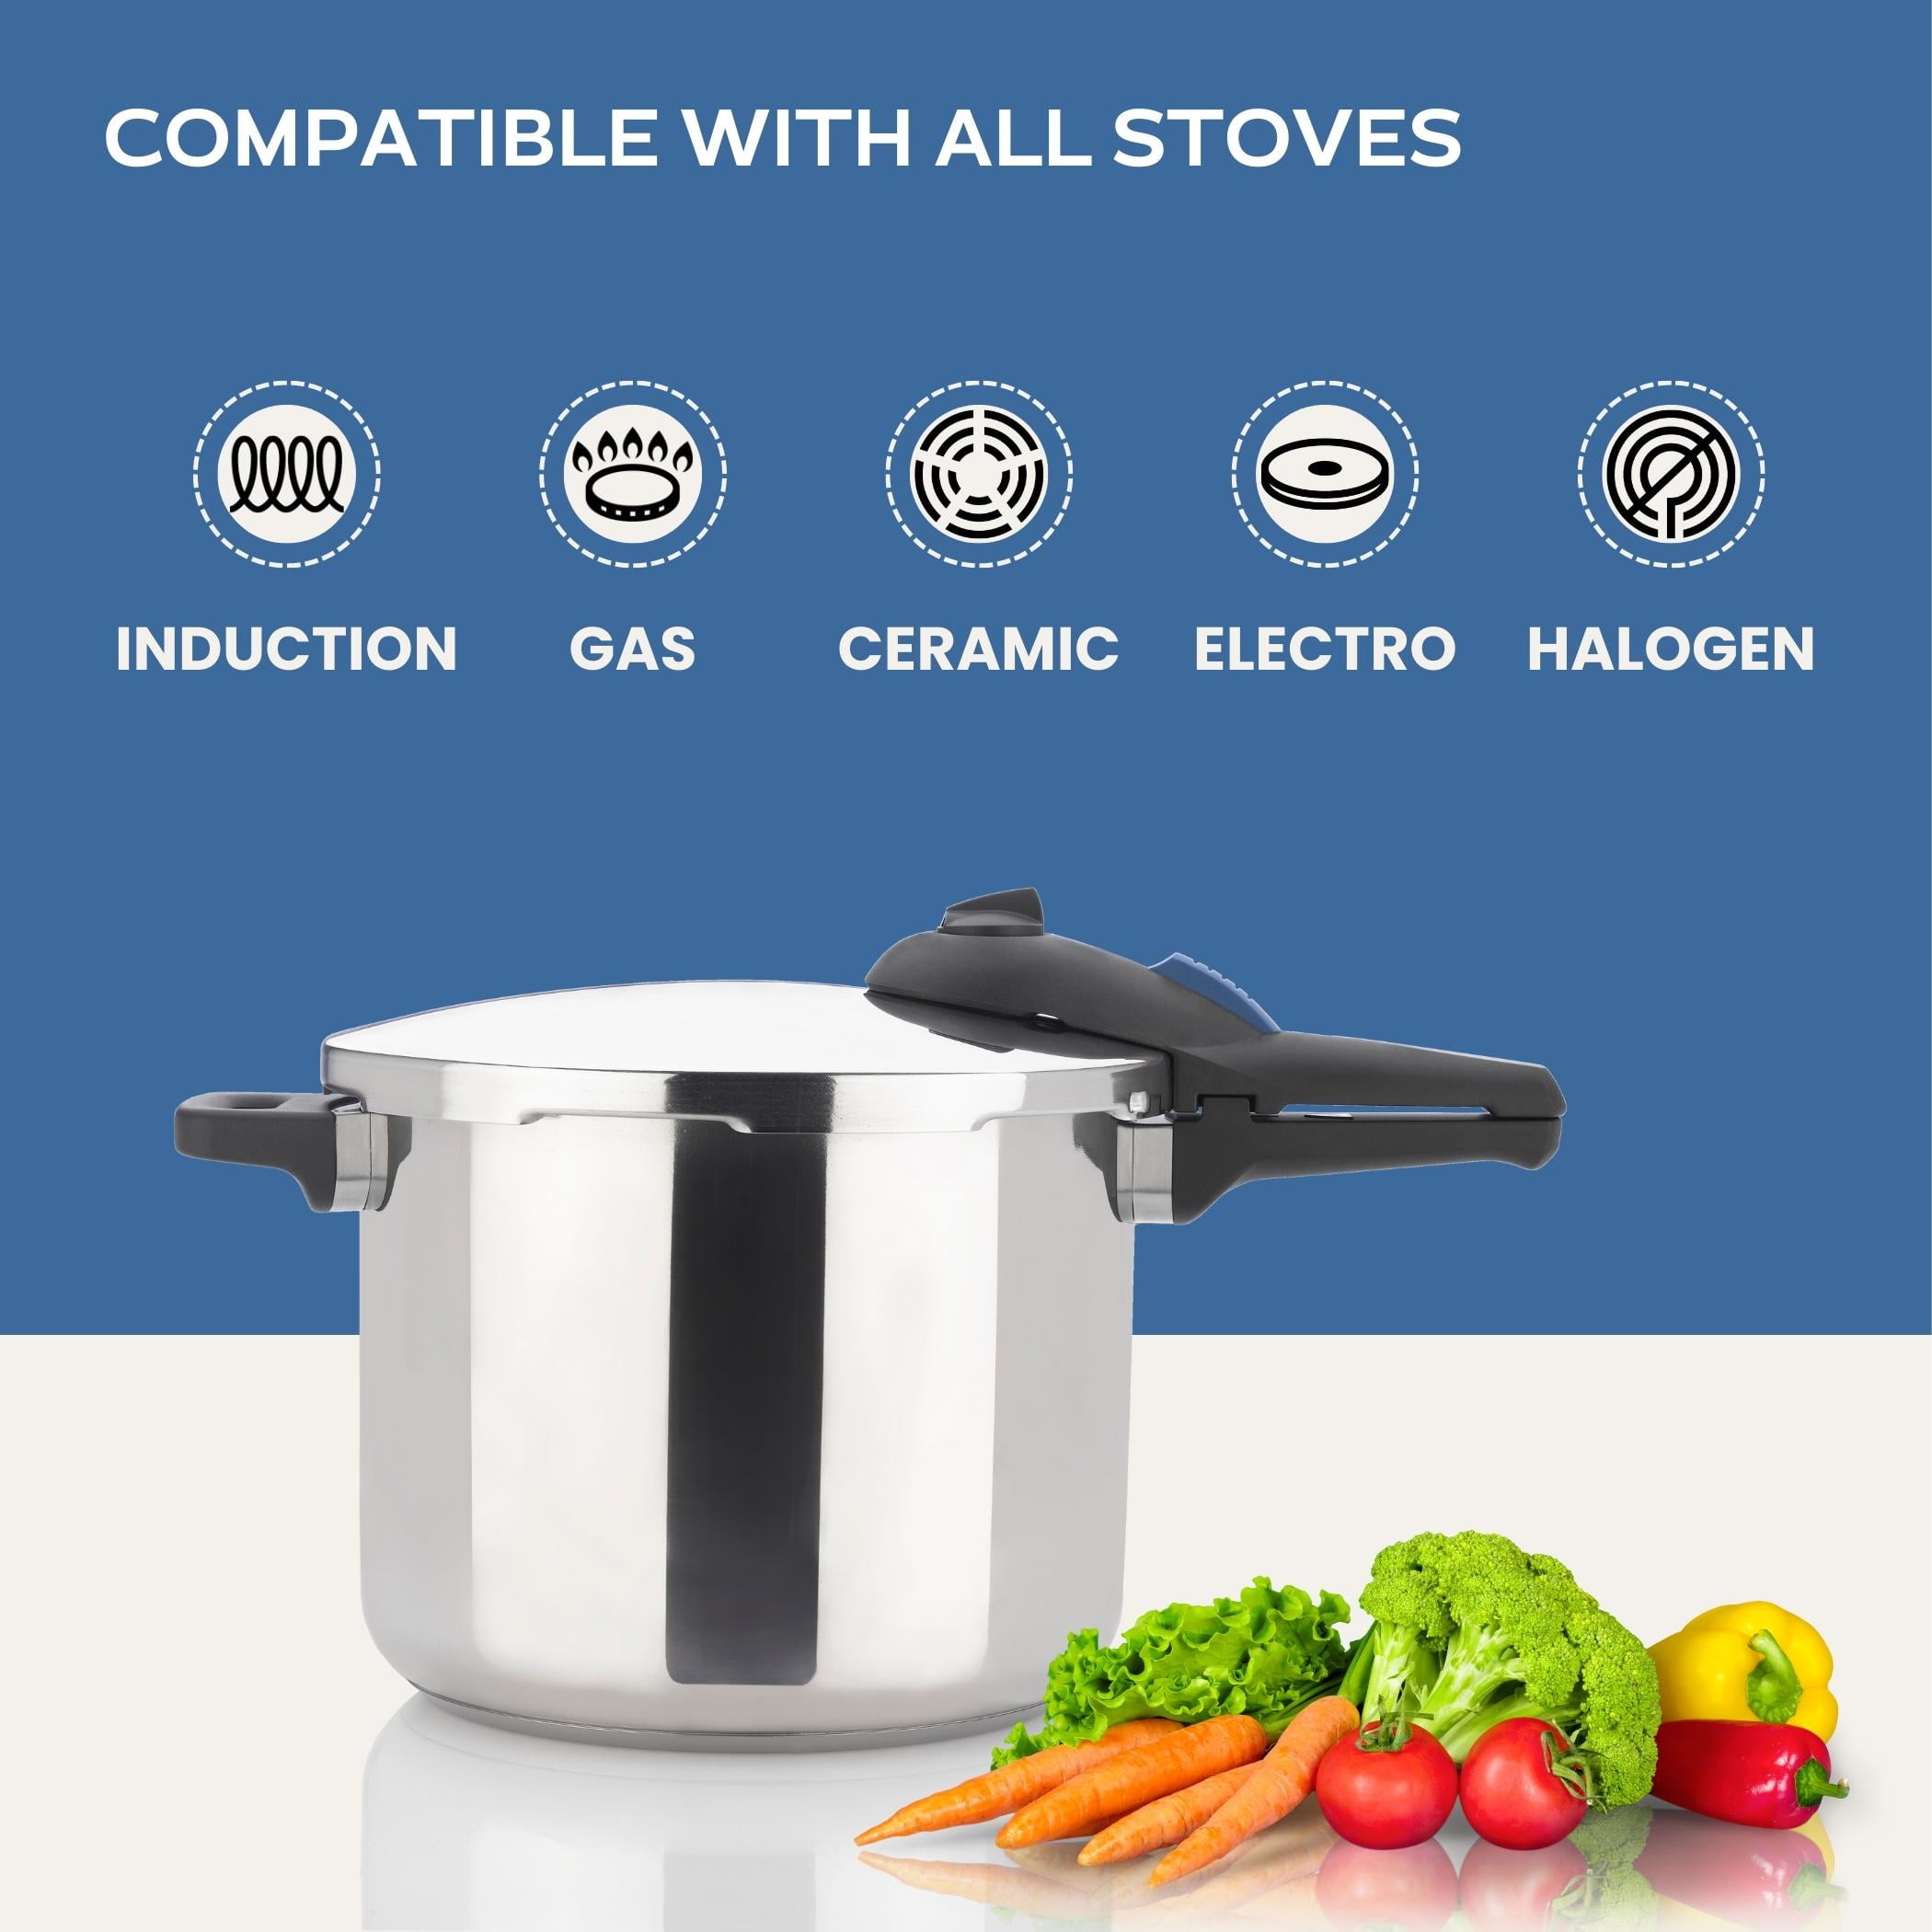 Zavor Duo 10 Qt. Stainless Steel Stovetop Pressure Cooker ZCWDU04 - The  Home Depot